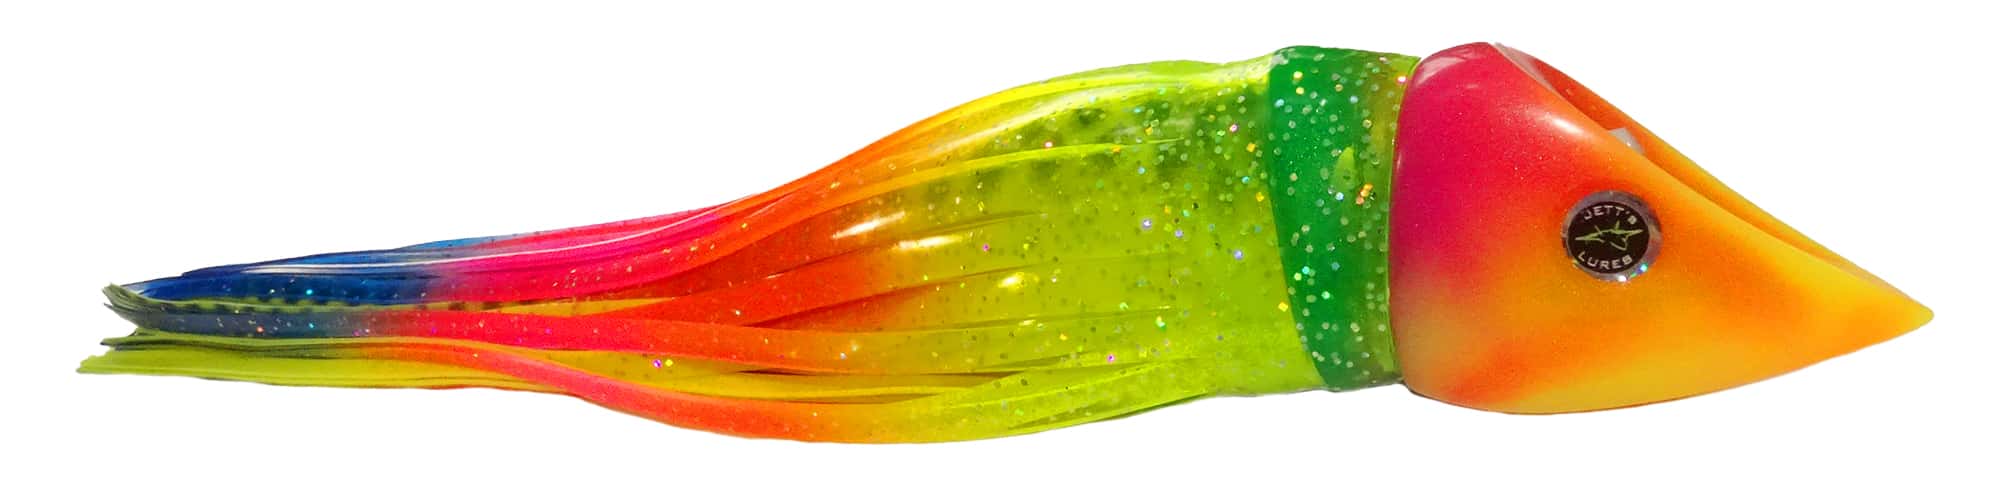 Jetts Lures - Wedgie Series - Skirted - Funky Punky Scheme